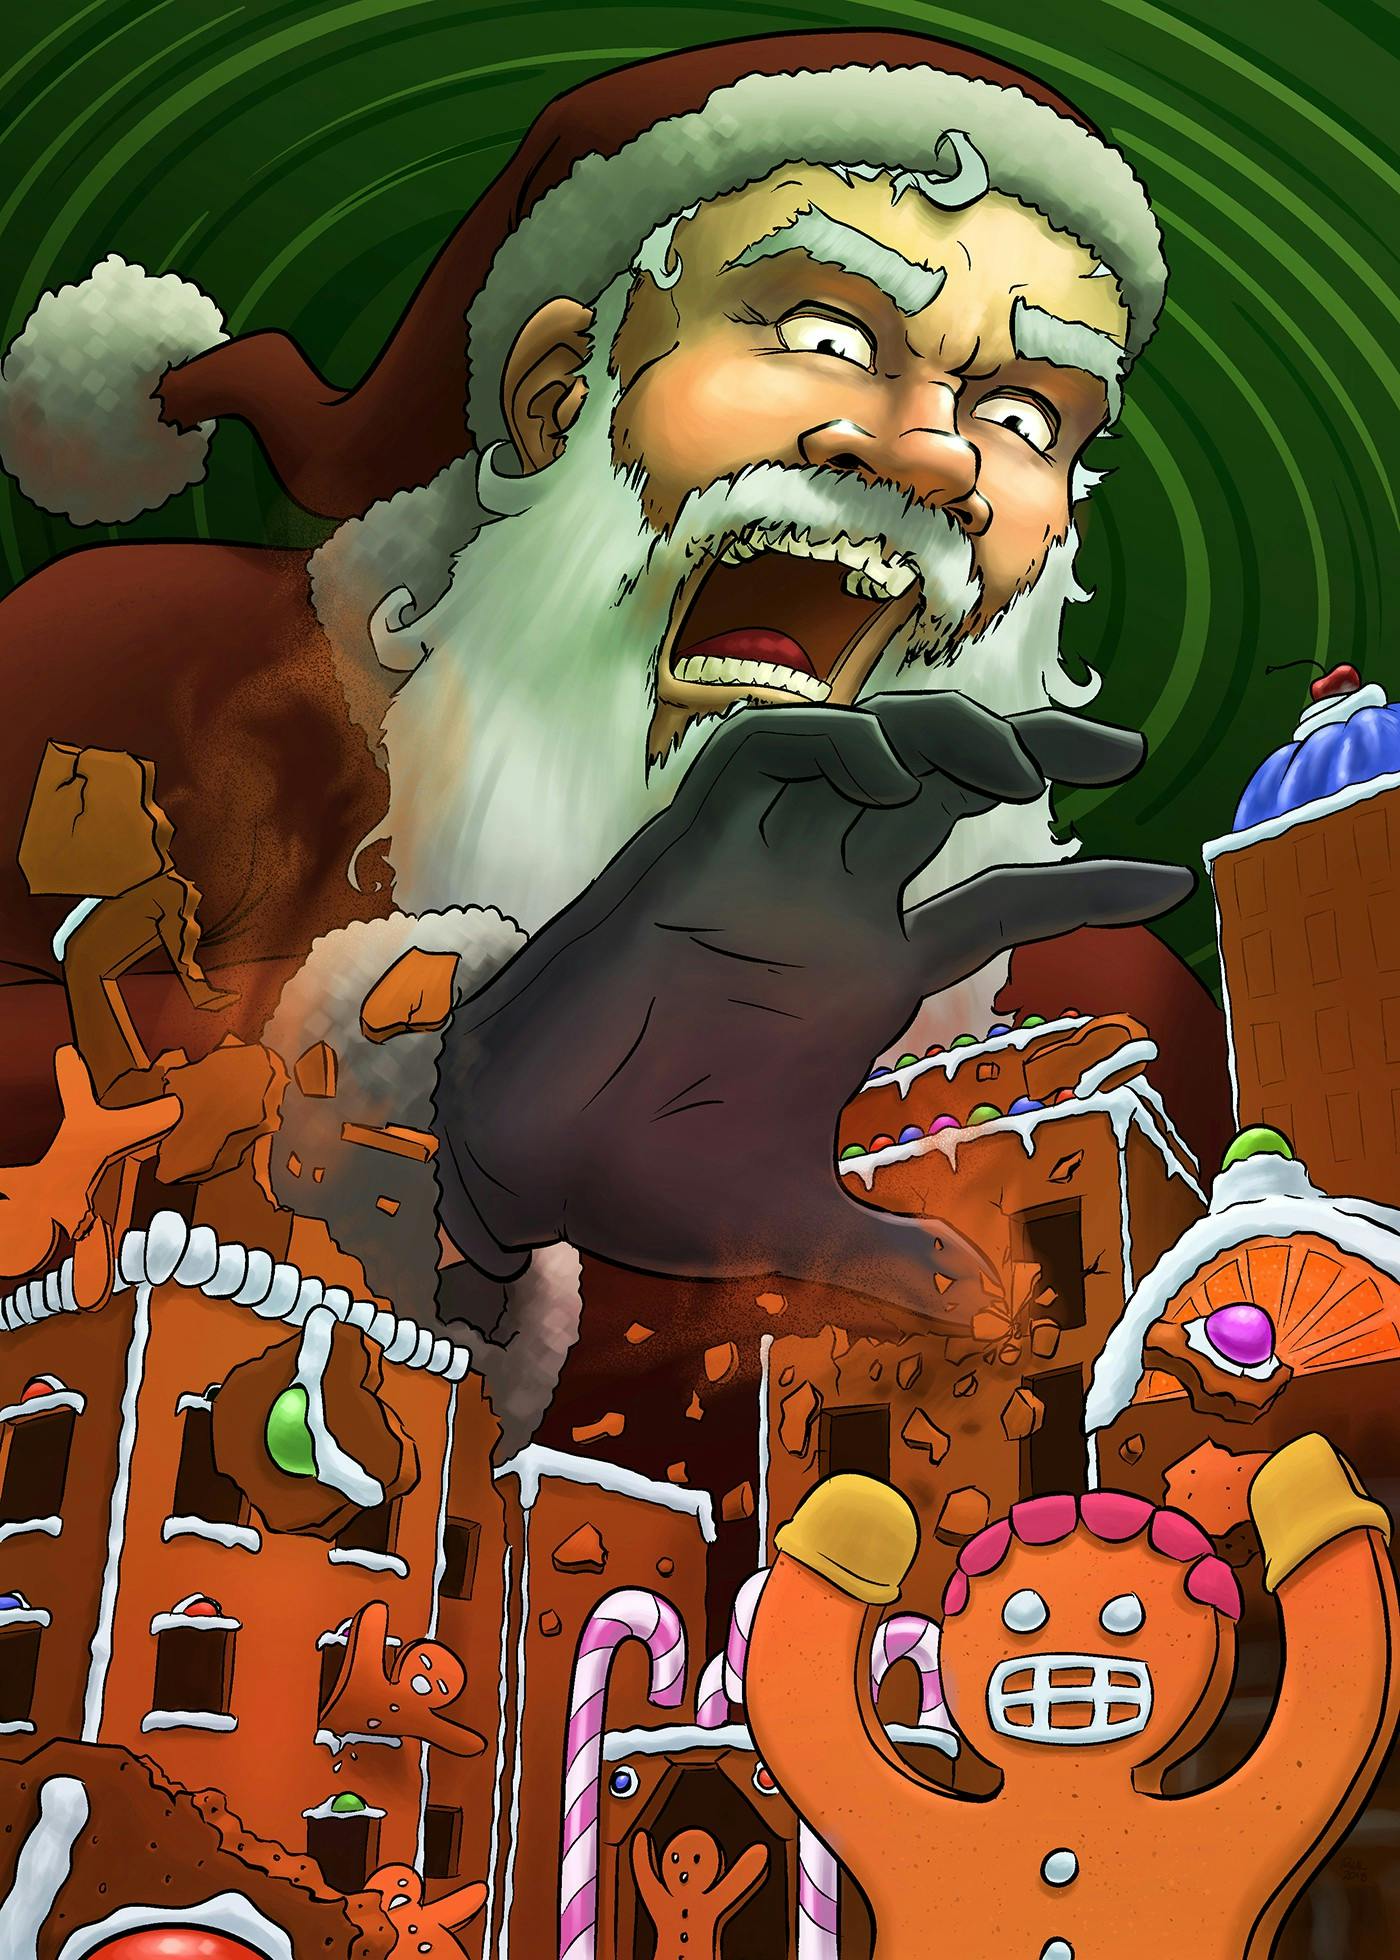 A digital illustration in comic book style of Santa Claus attacking a gingerbread city with gingerbread people panicking in the streets.